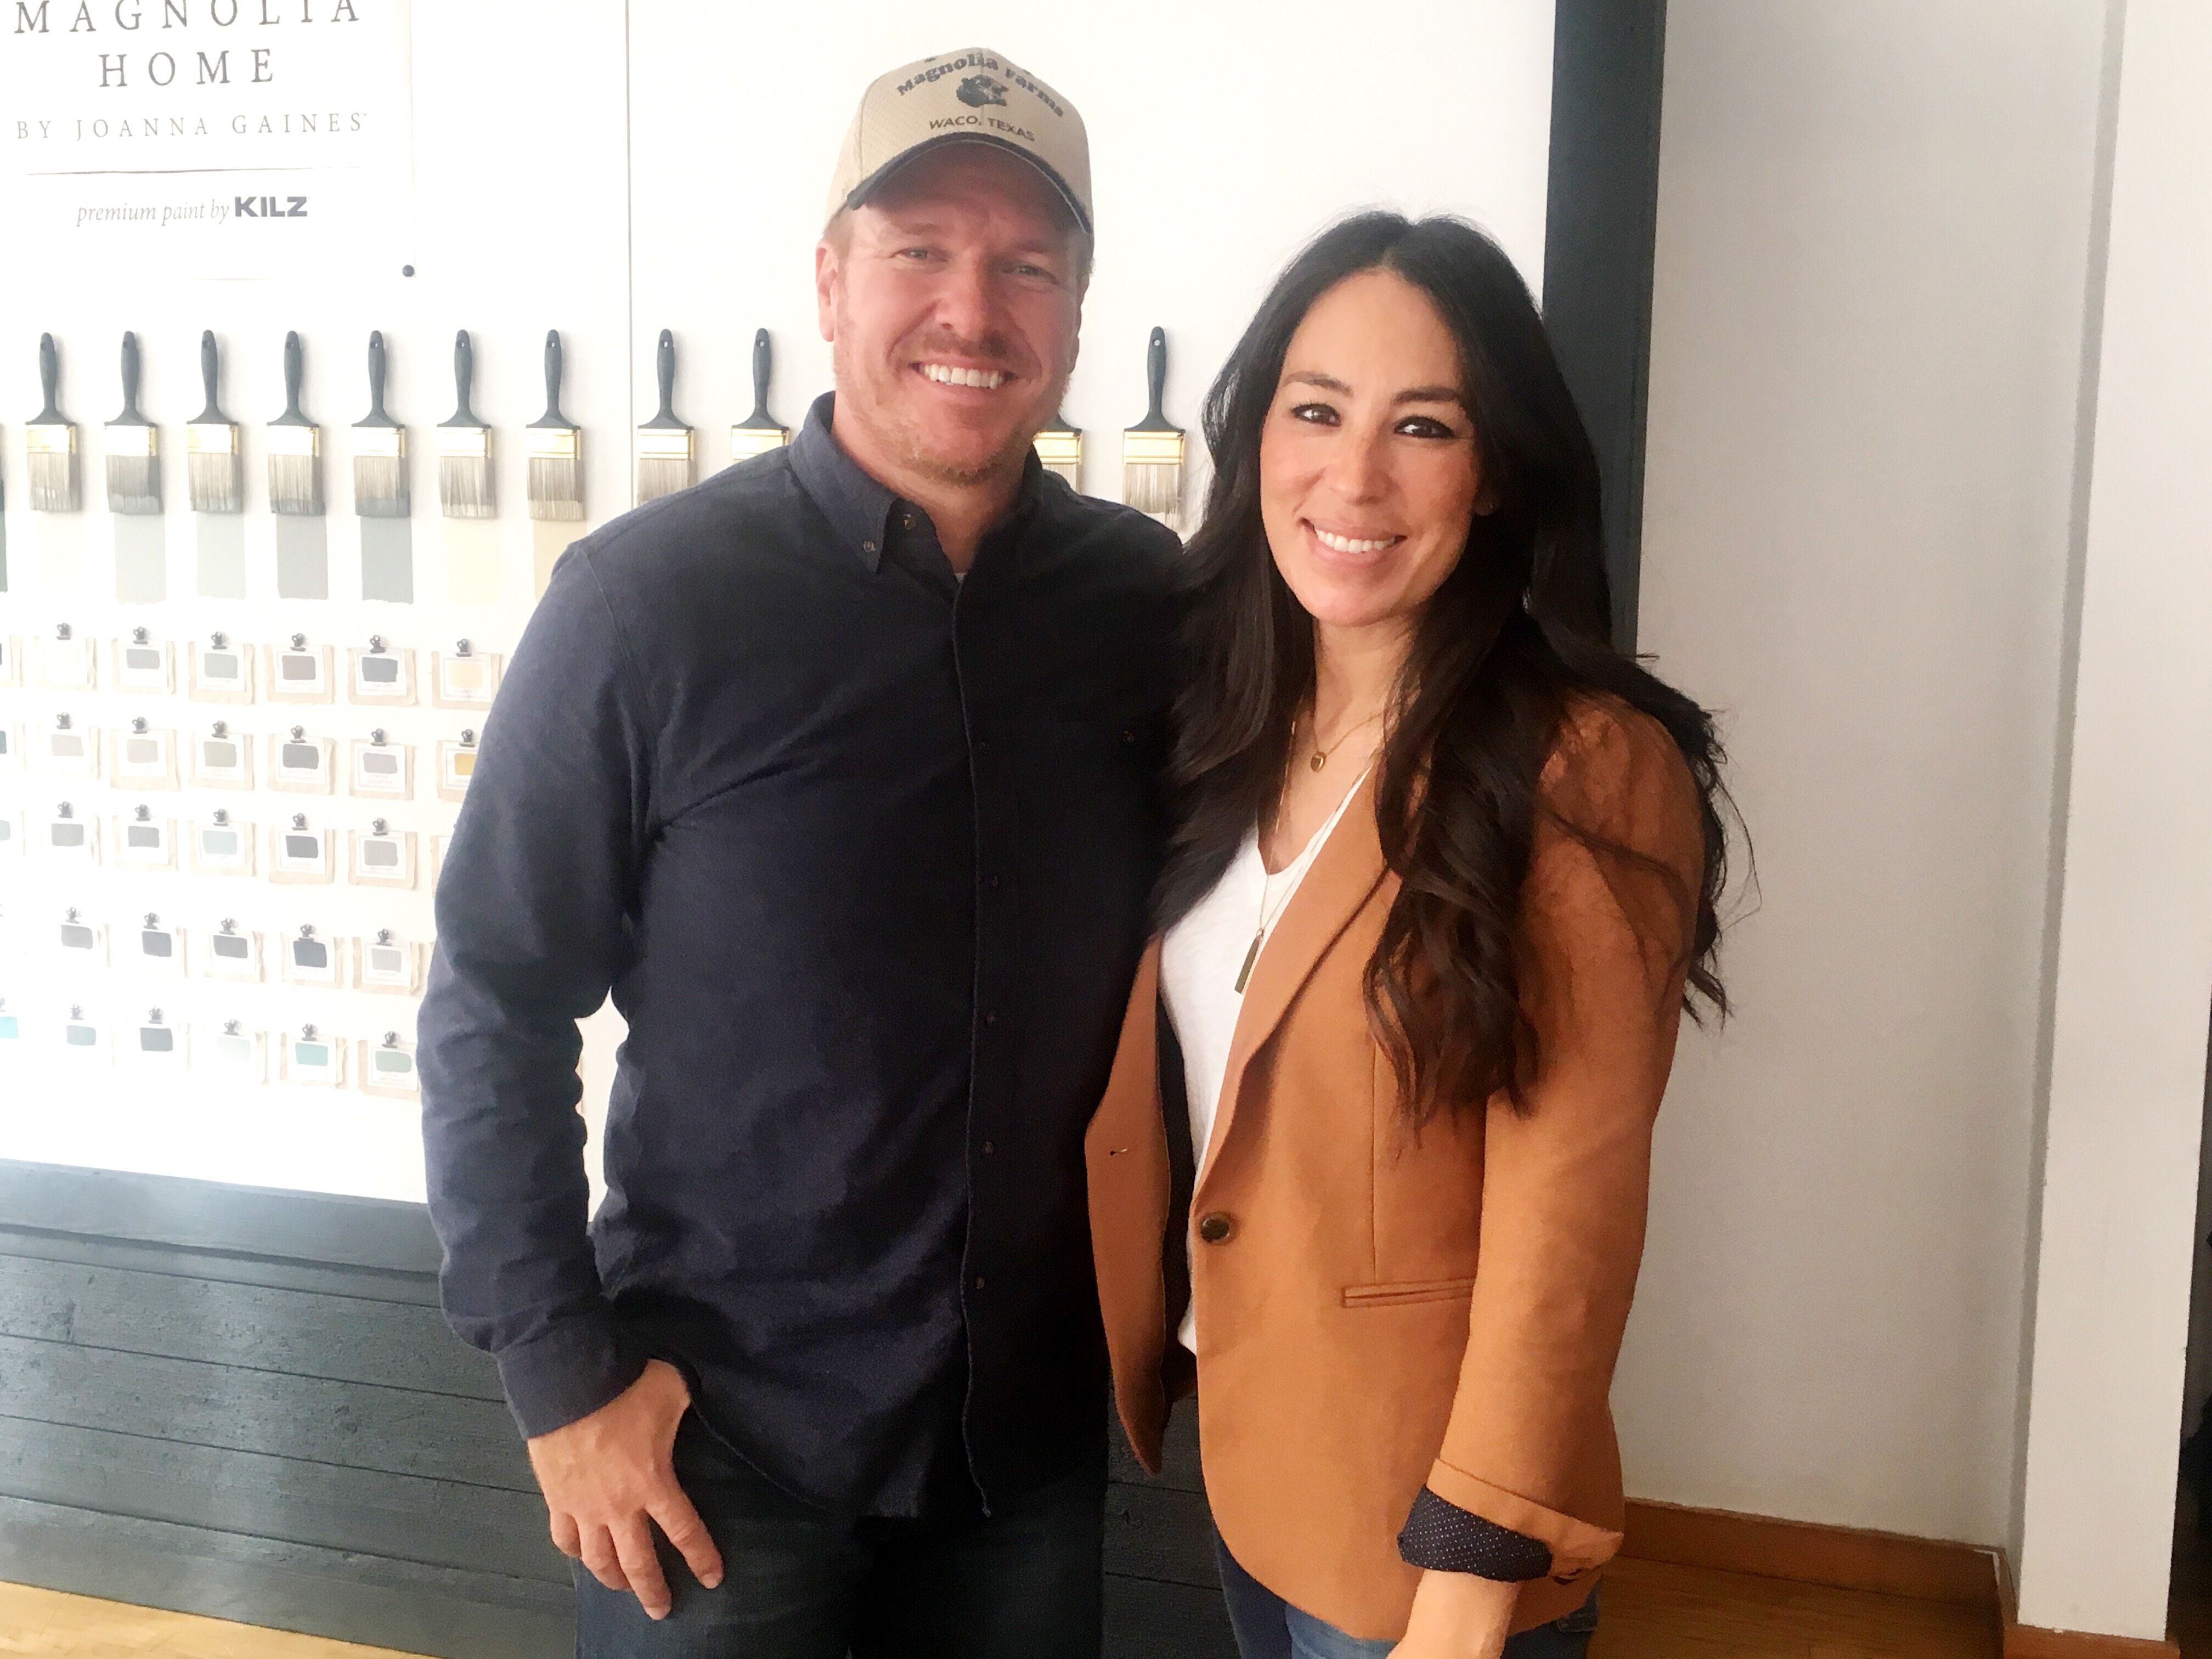 Chip Gaines Talks Falling Behind on 'Fixer Upper' Production: 'We